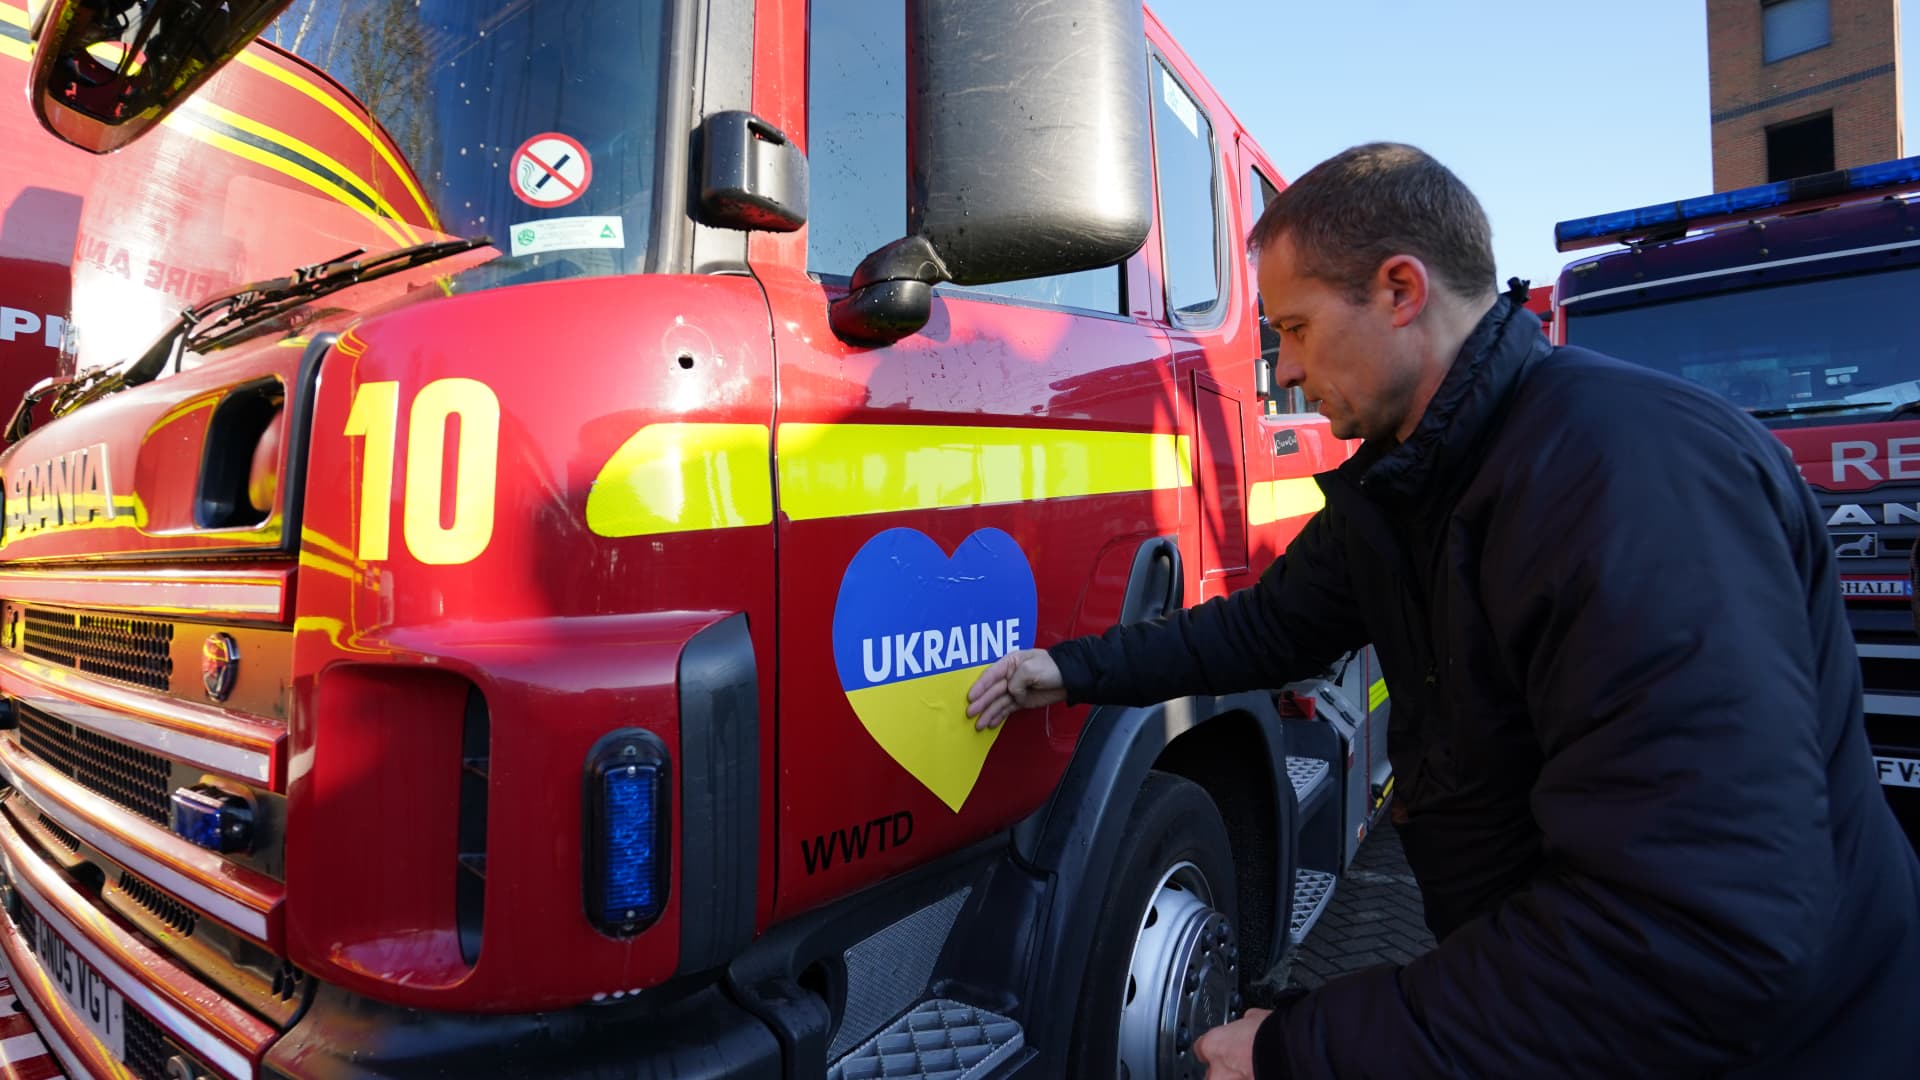 Fire officers at Ashford fire station prepare vehicles and donated emergency service equipment, organised by Fire AID and the National Fire Chiefs Council, prior to a convoy of vehicles setting off from Ashford, Kent, for the Polish border of Ukraine. Picture date: Saturday March 19, 2022.